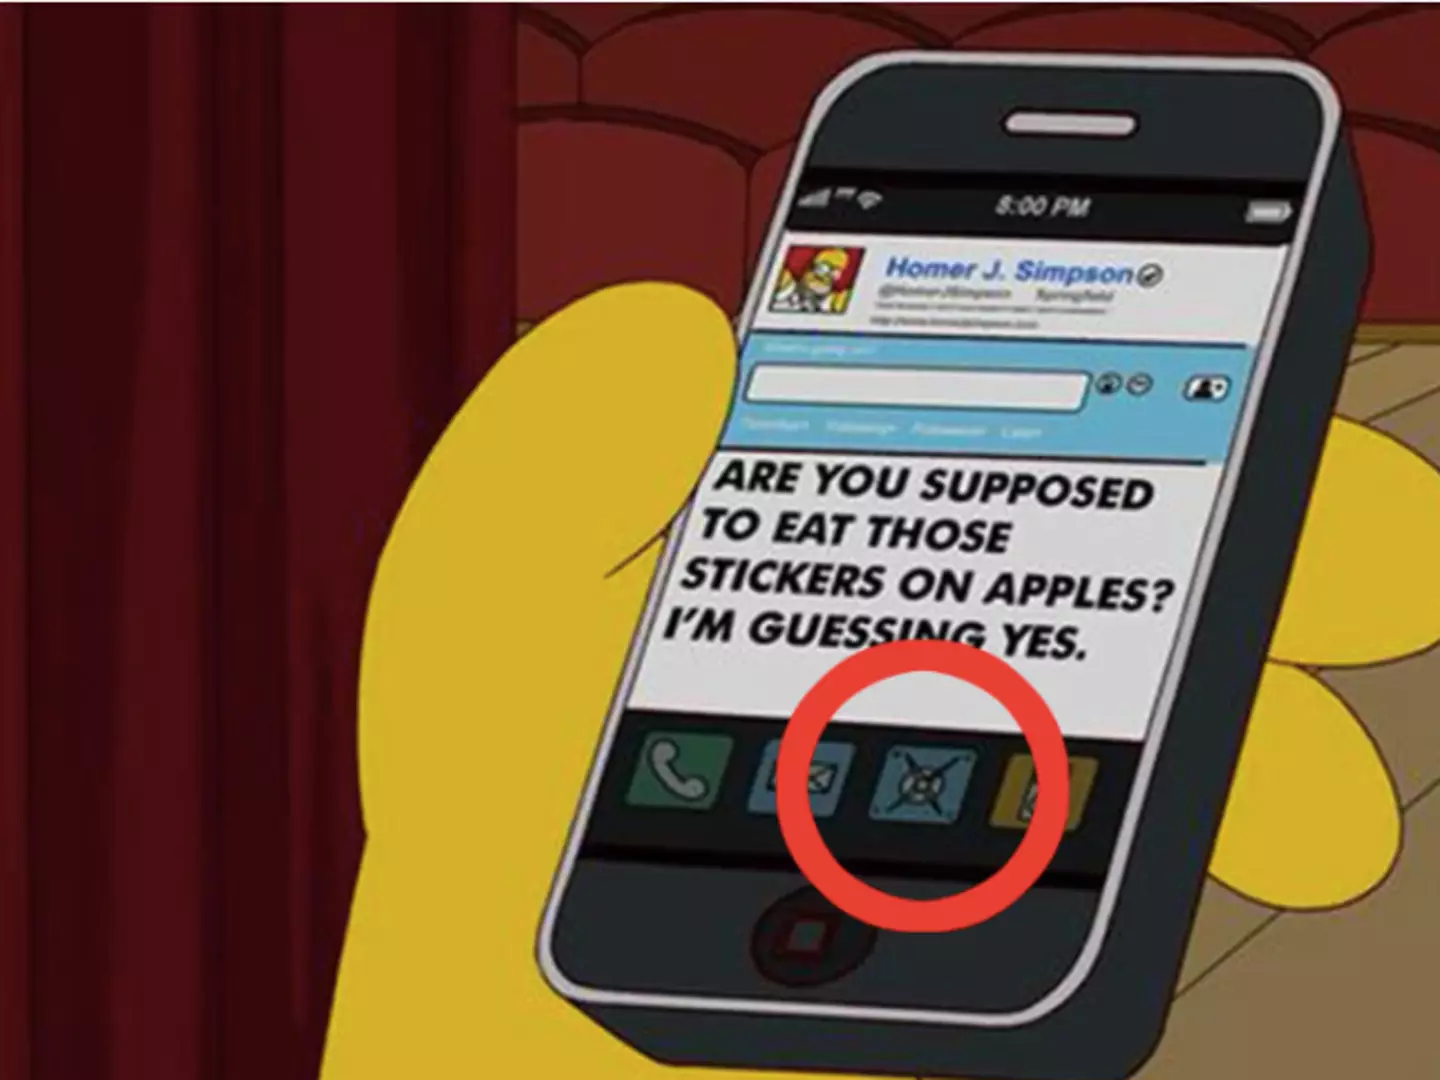 Homer appeared to have X on his phone long before the rest of us.